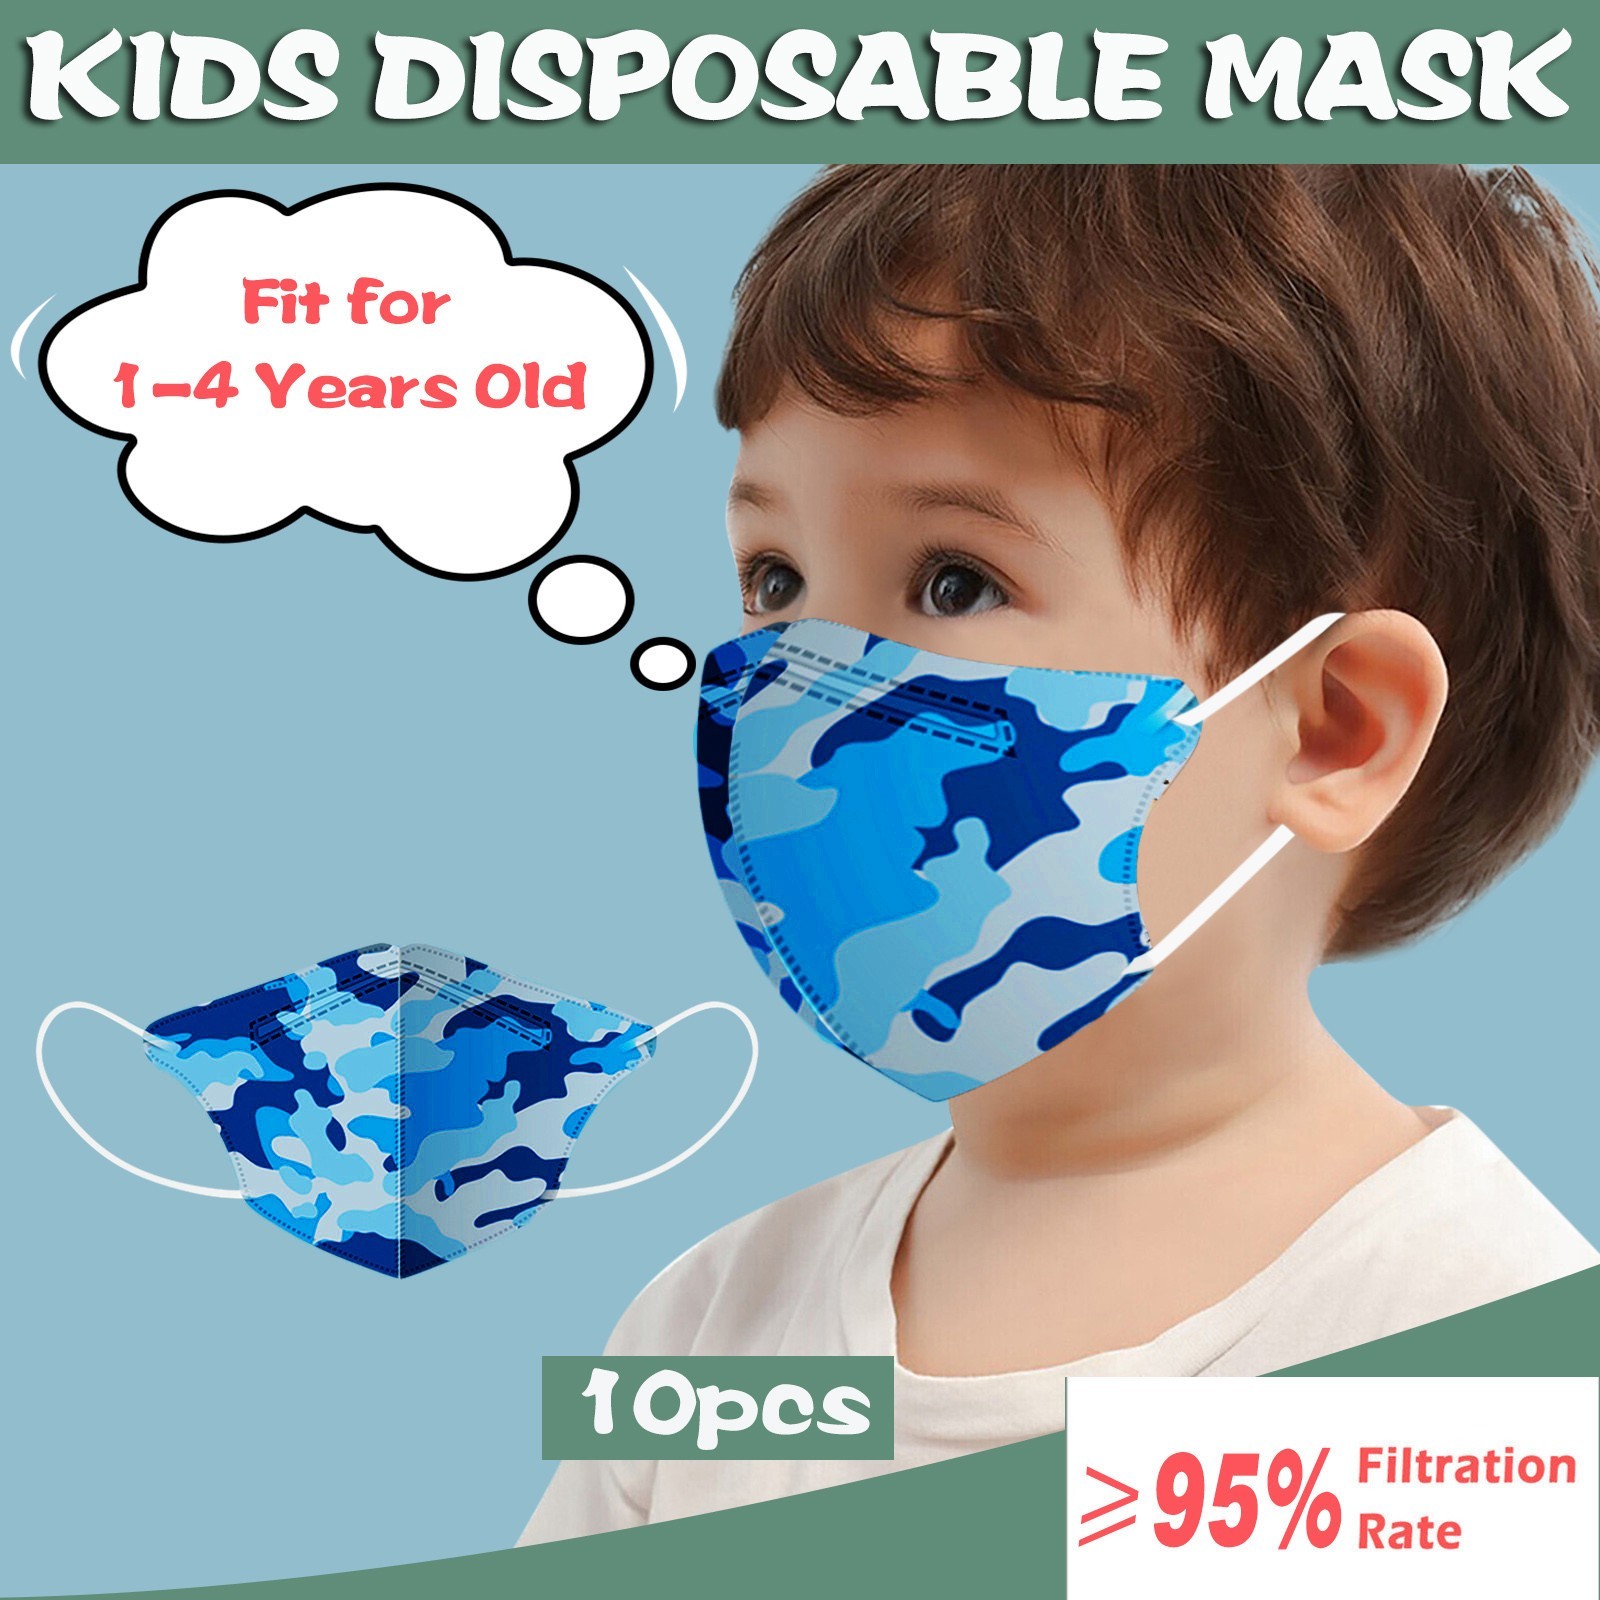 23 Styles 10pcs Kids Masks Children Baby 0-3 Years Old Mask Disposable Face Mask Camouflage Animal Print 4ply Ear Loop Masks